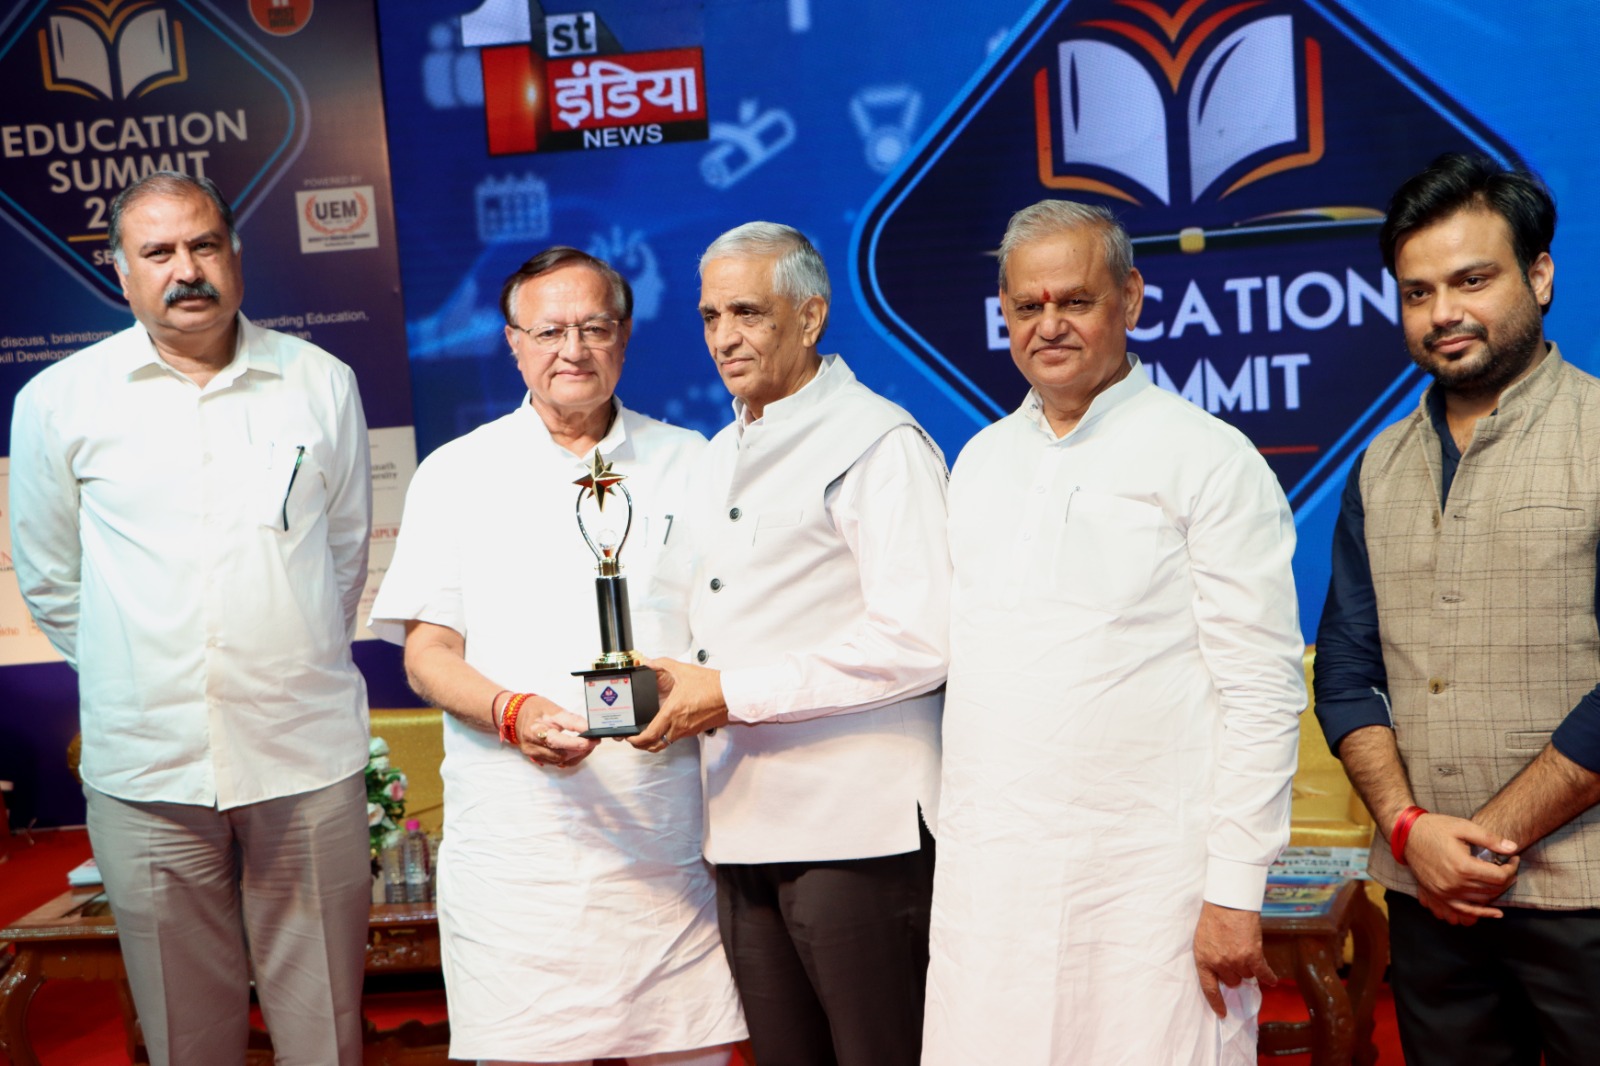 First India News channel Award